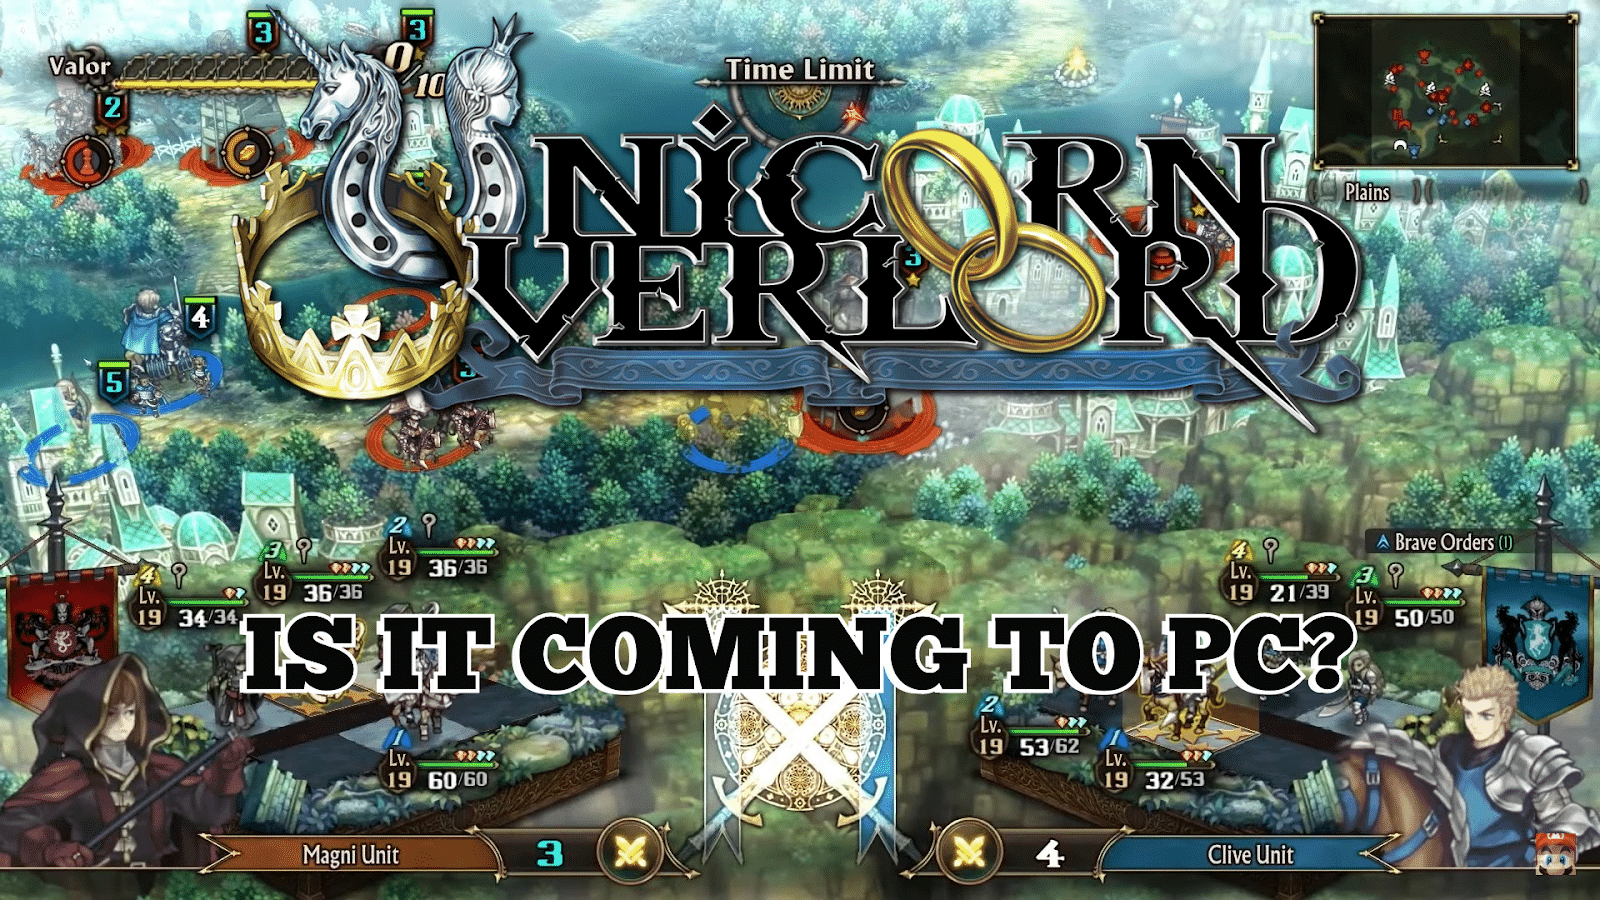 Unicorn Overlord PC Release: When is it Coming to PC?